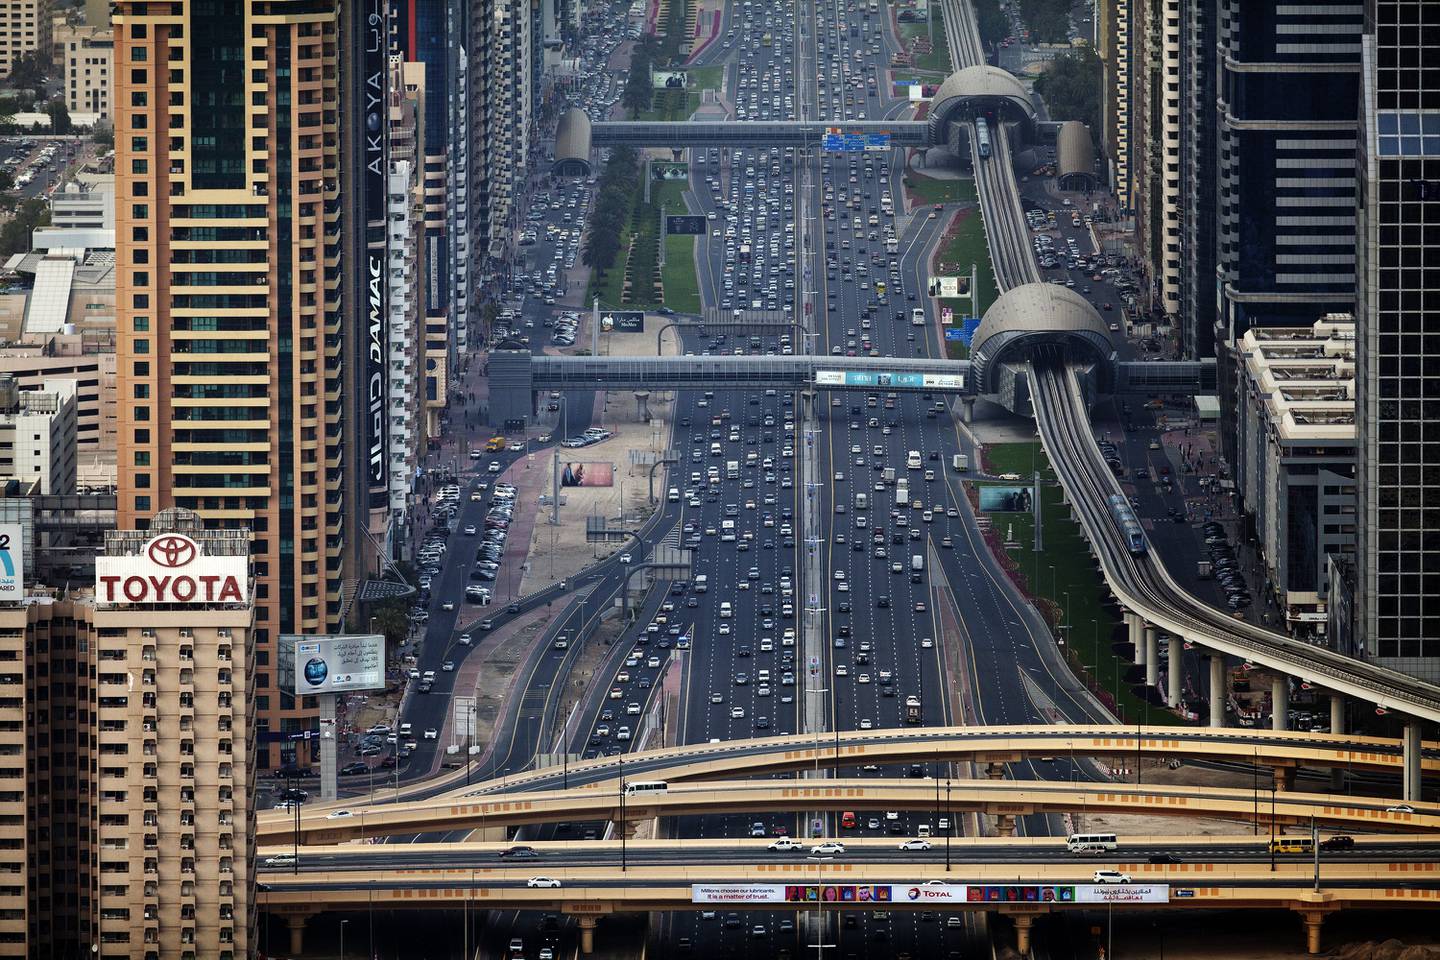 https://299.com/fidu-news-details/dubai-population-to-surge-to-nearly-6m-in-20-years-amid-urban-transformation